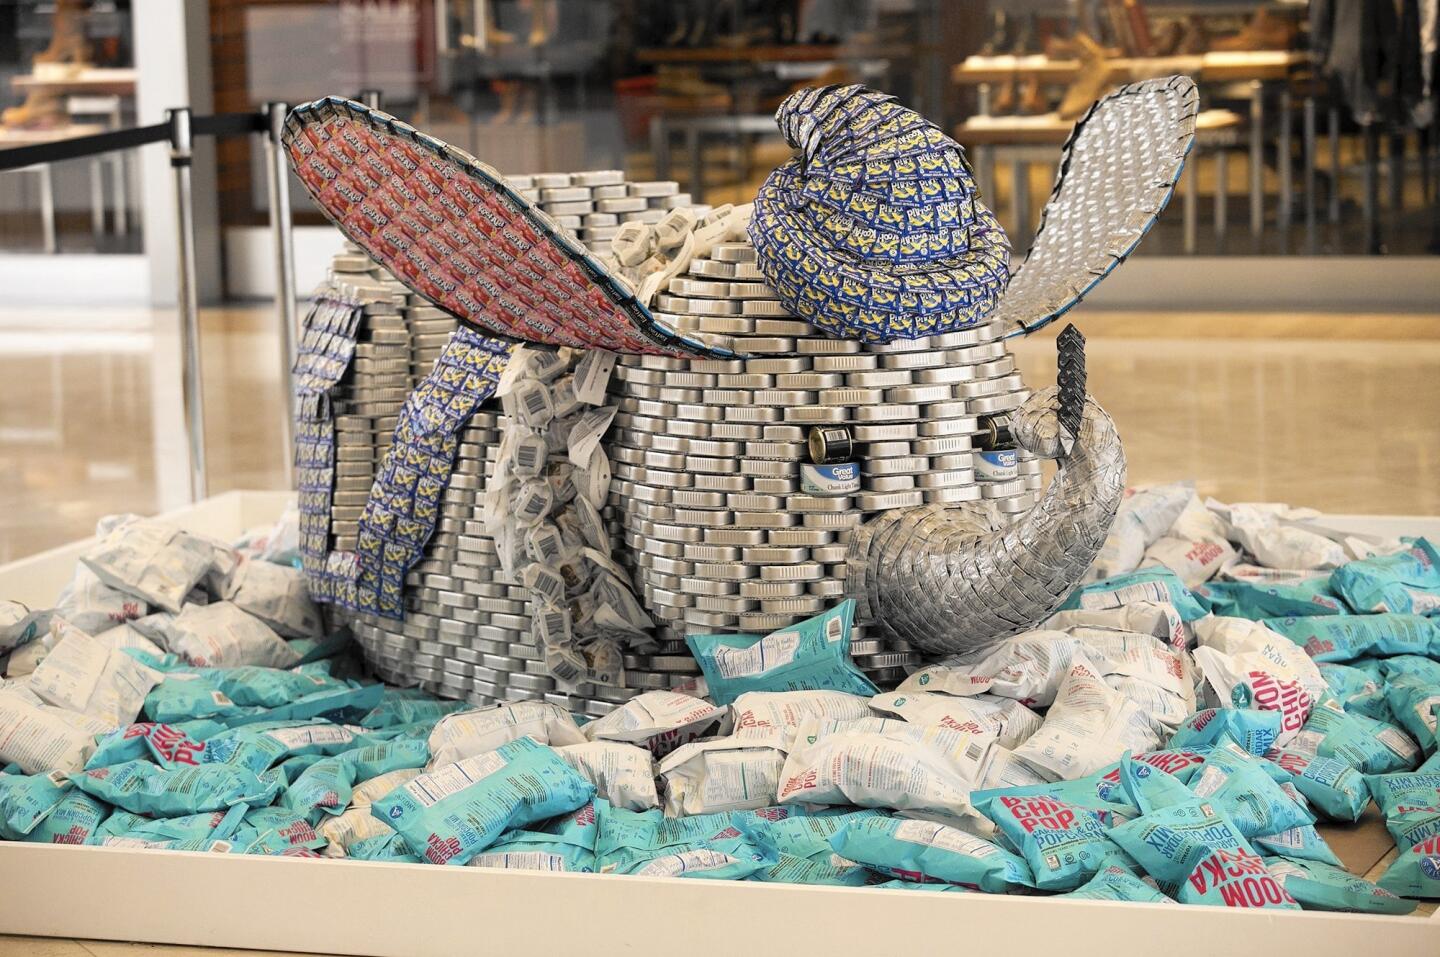 Disneyland's "If Elephants Can Fly, We CAN End Hunger!" is made with 4,200 cans.